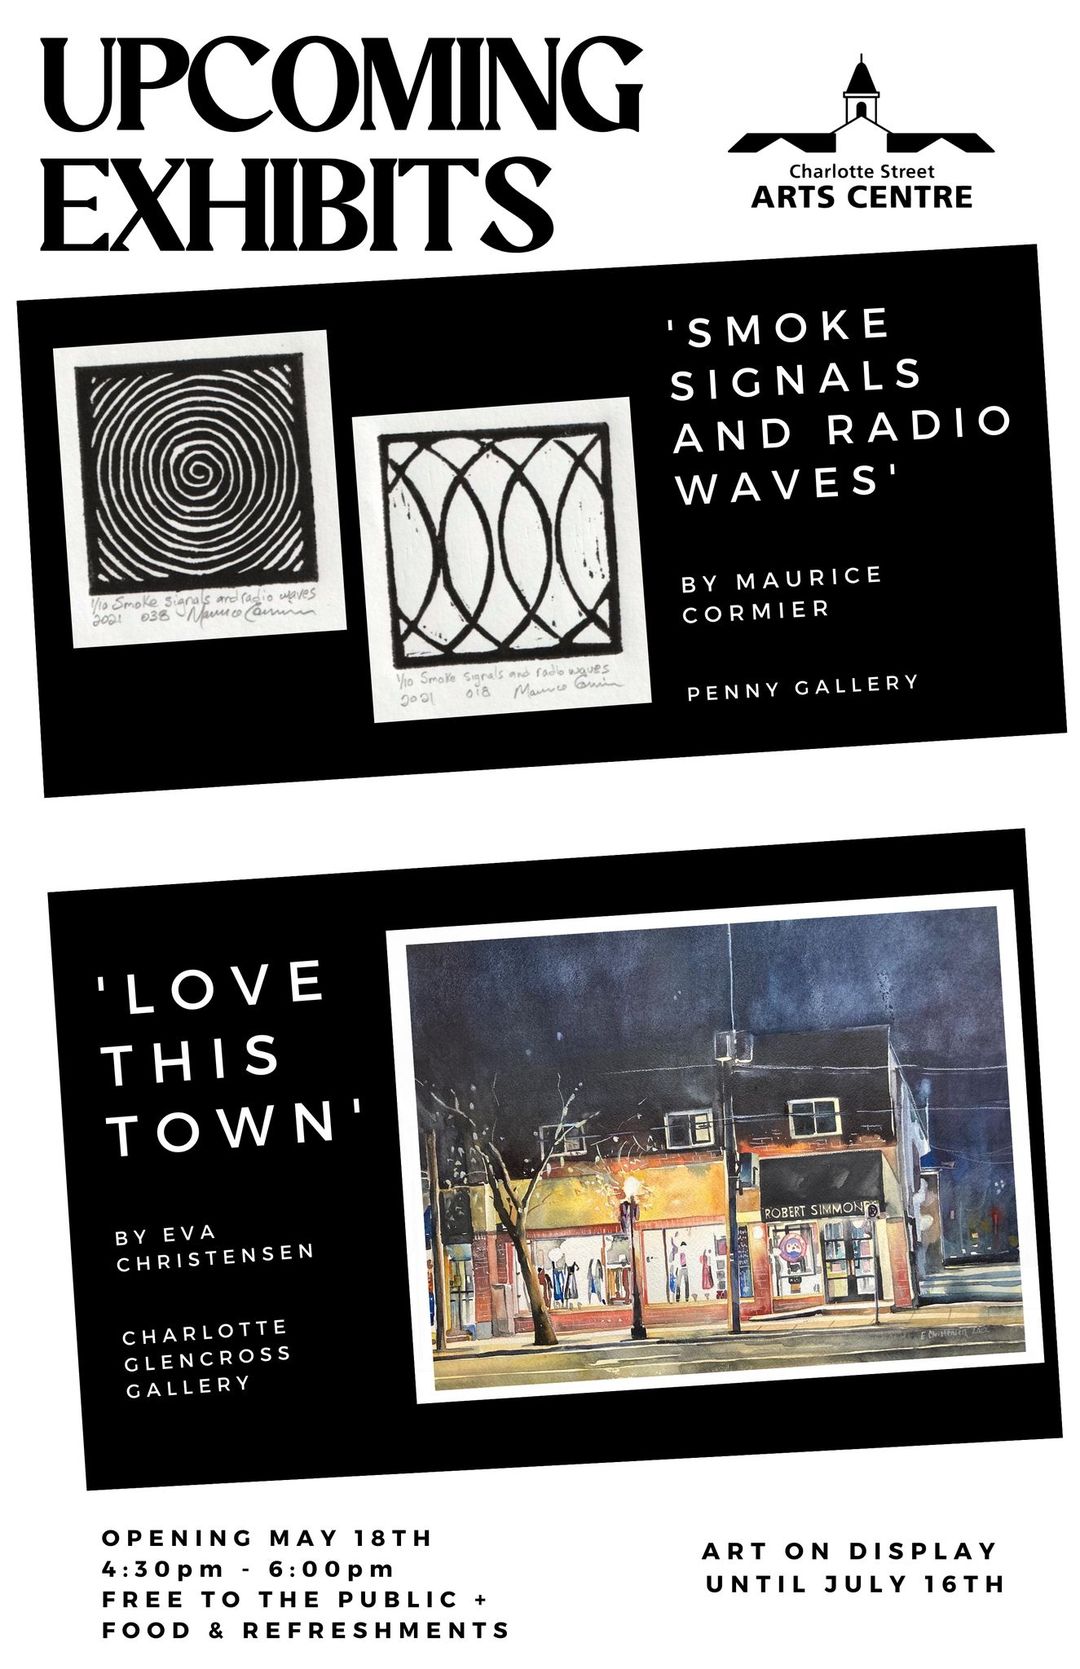 Upcoming exhibits at the Charlotte Street Arts Centre. Smoke Signals and Radio Waves by Maurice Cormier, and Love This Town by Eva Christensen.